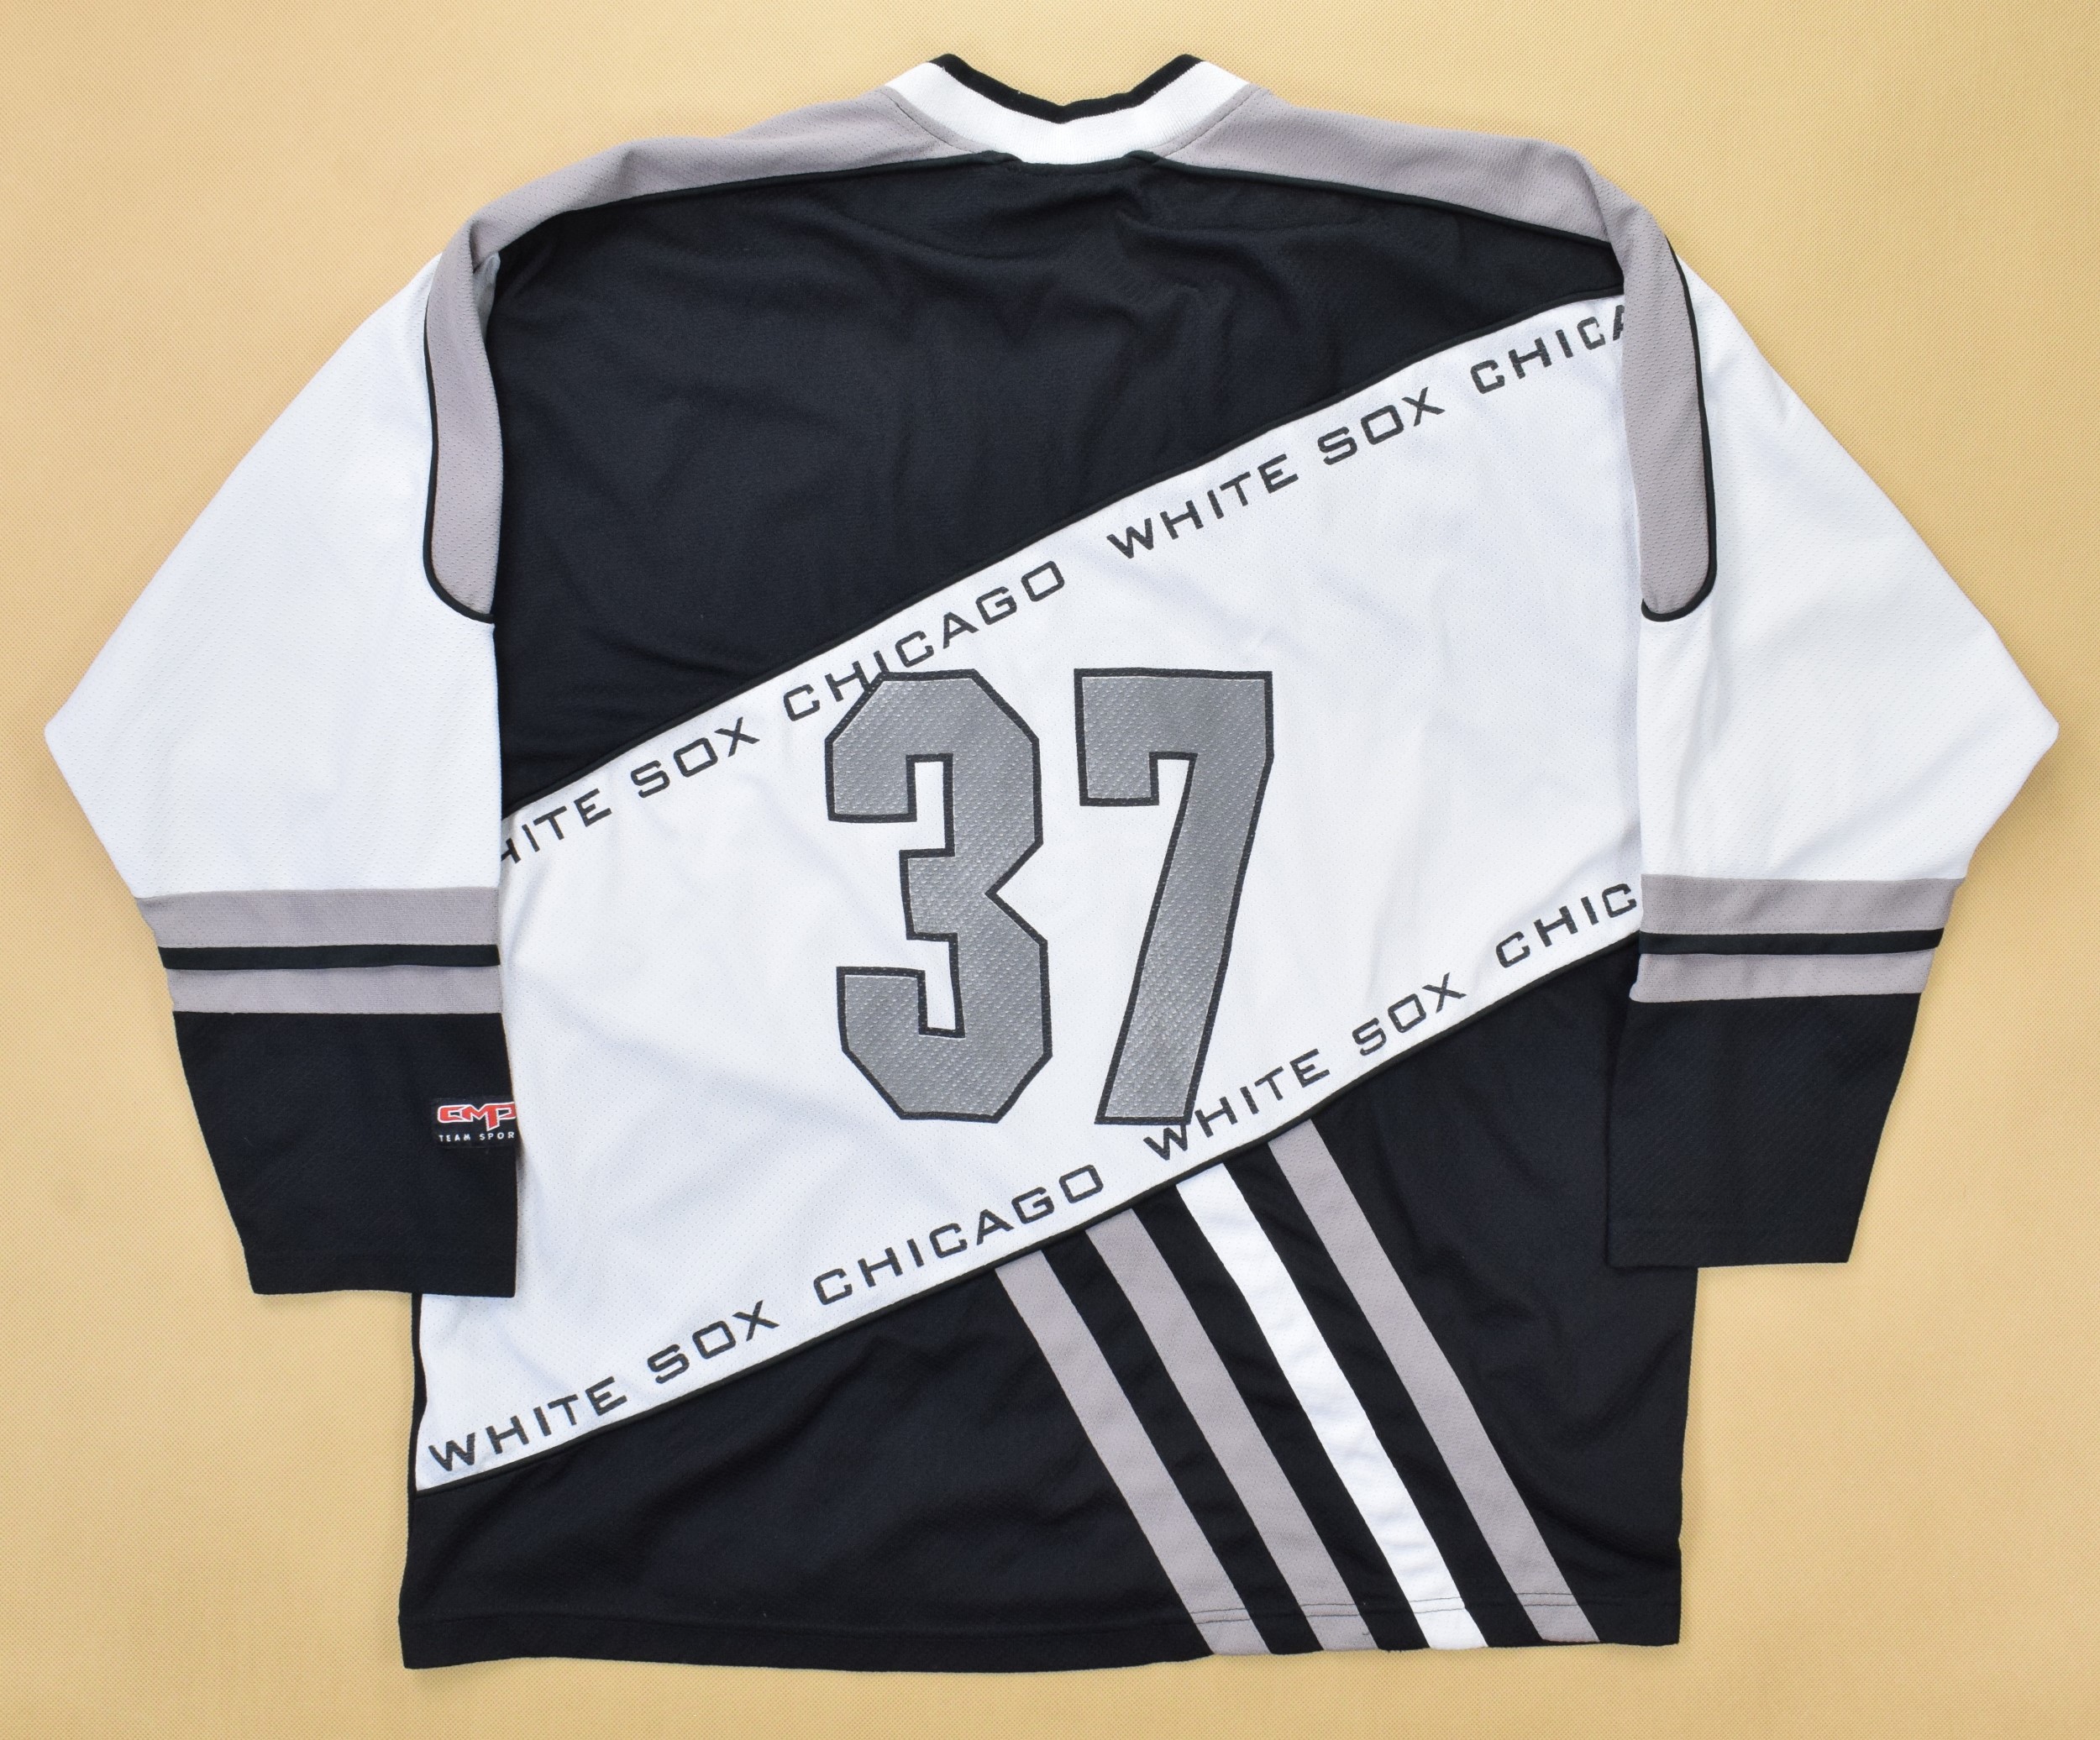 Hockey and soccer jerseys are part of the White Sox early